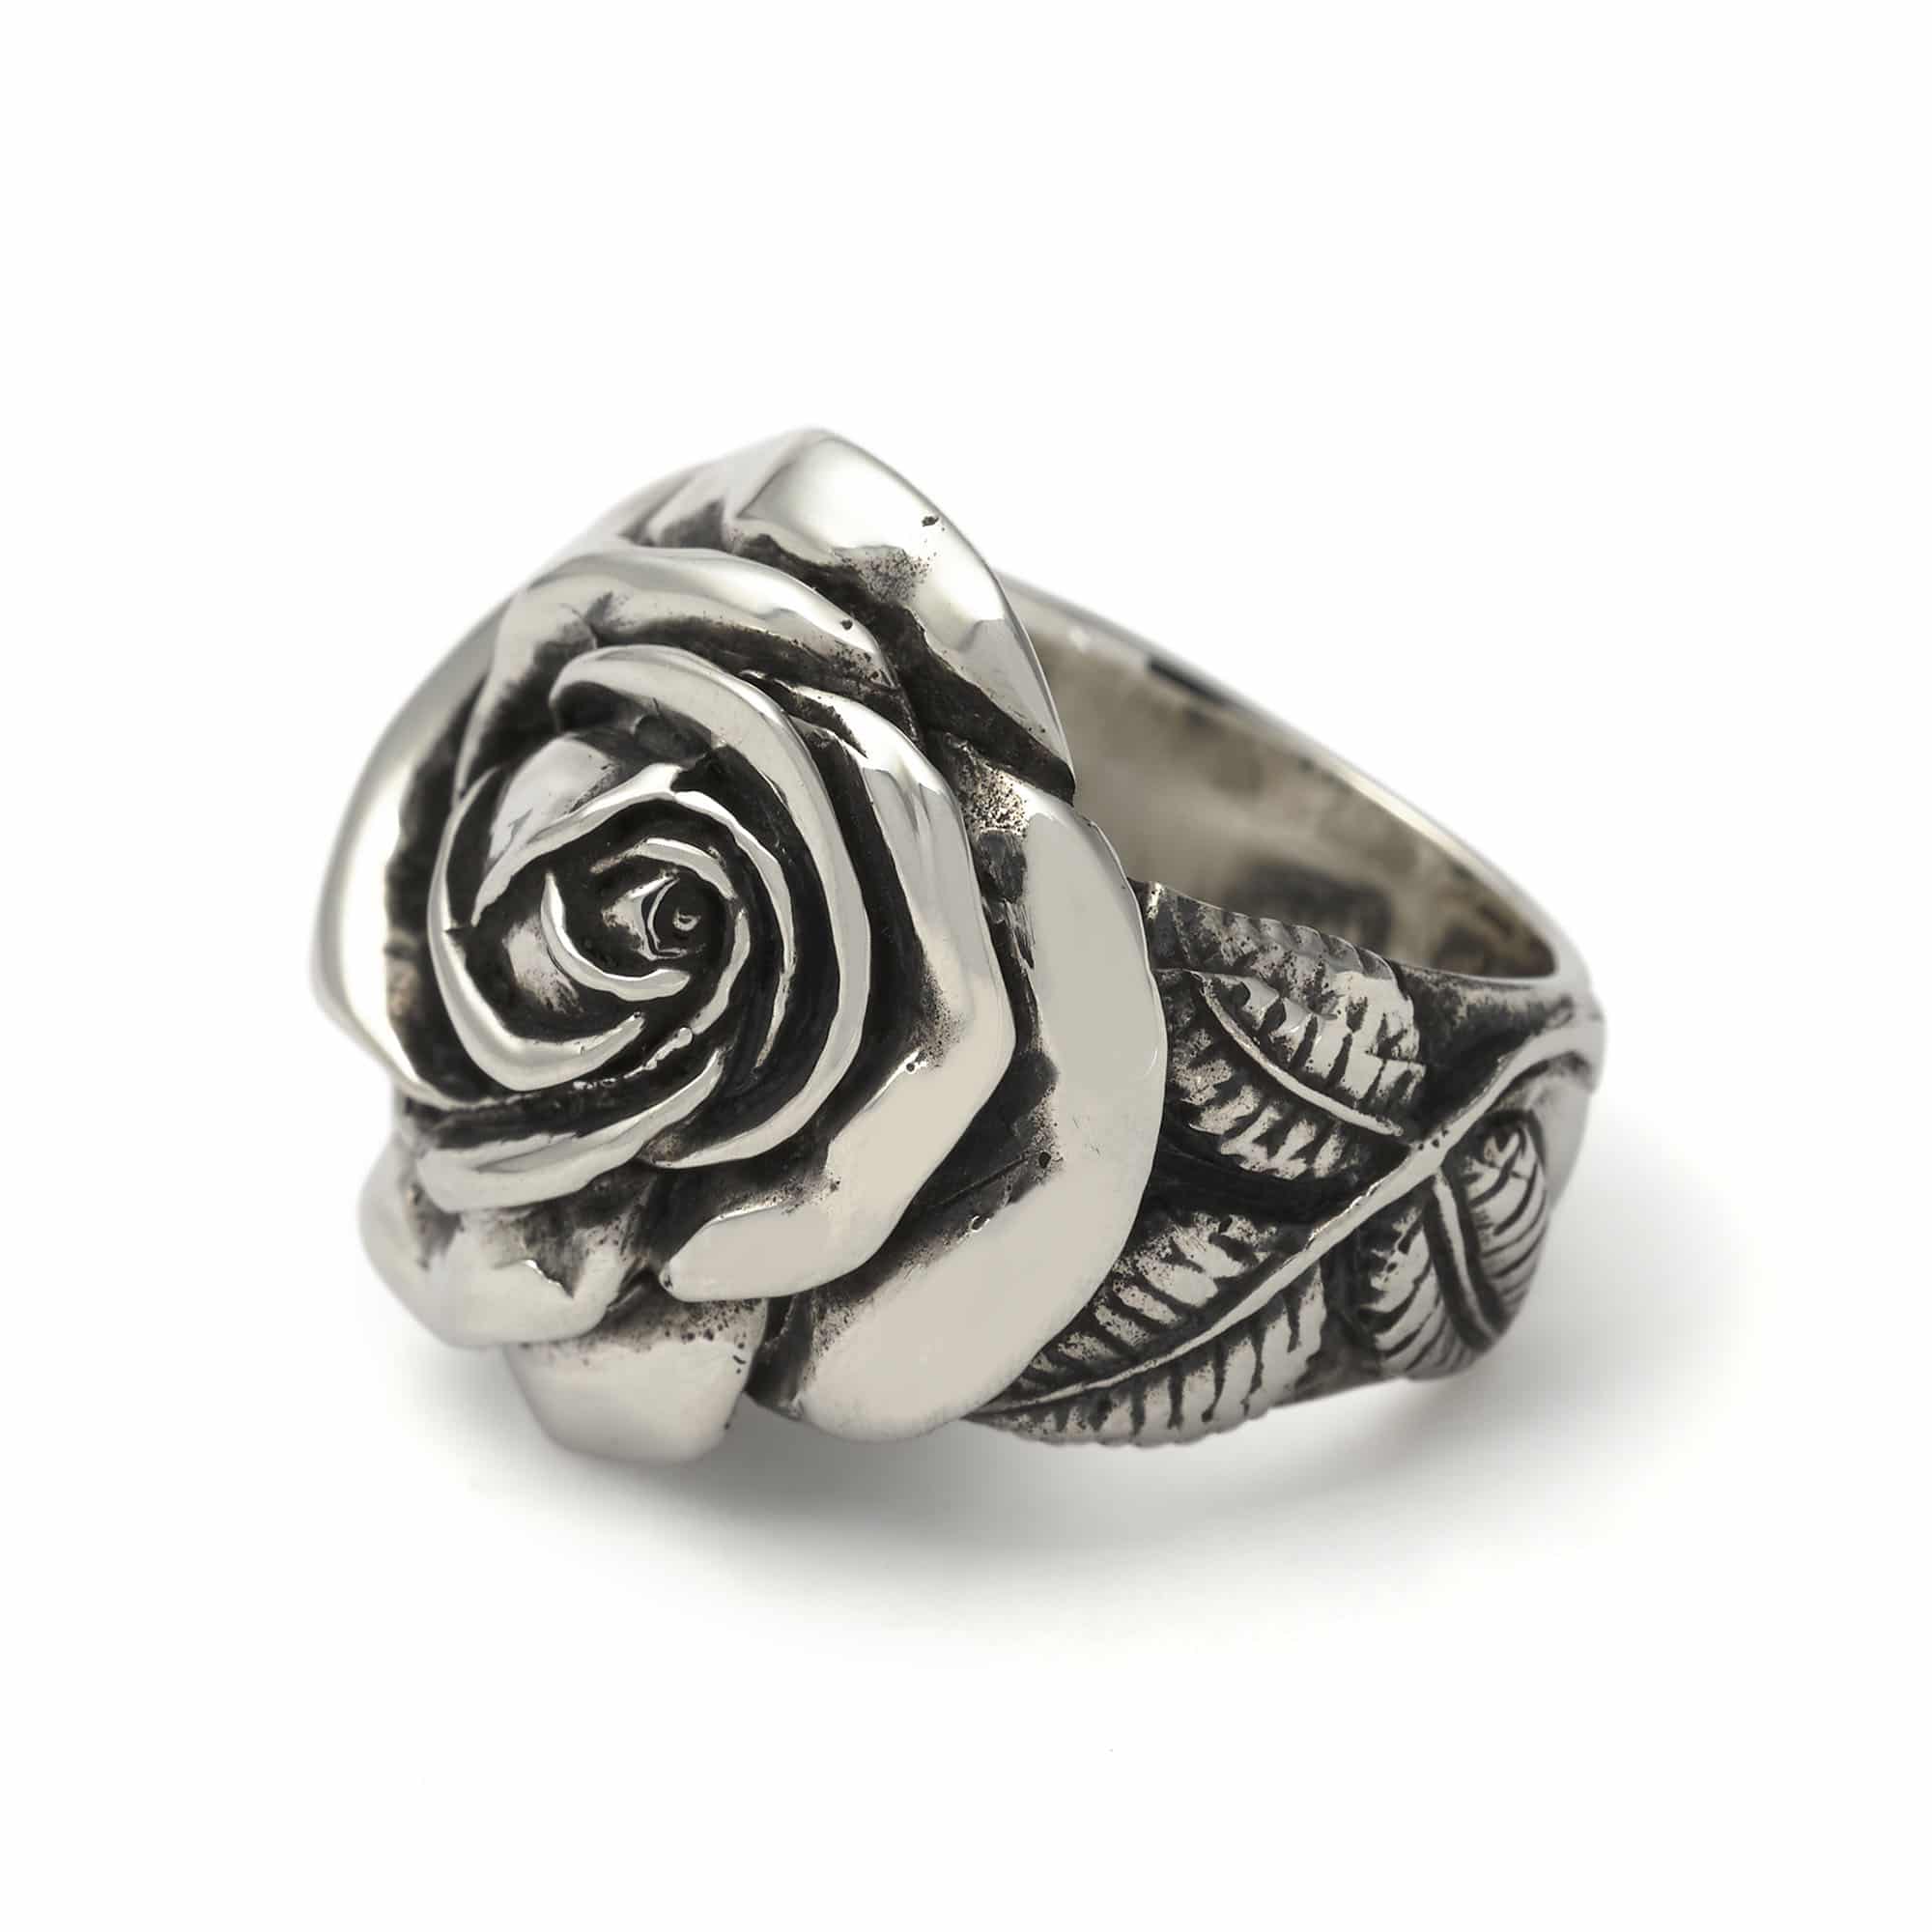 Floral Ring Designs - The Rose patterns that steal your heart!